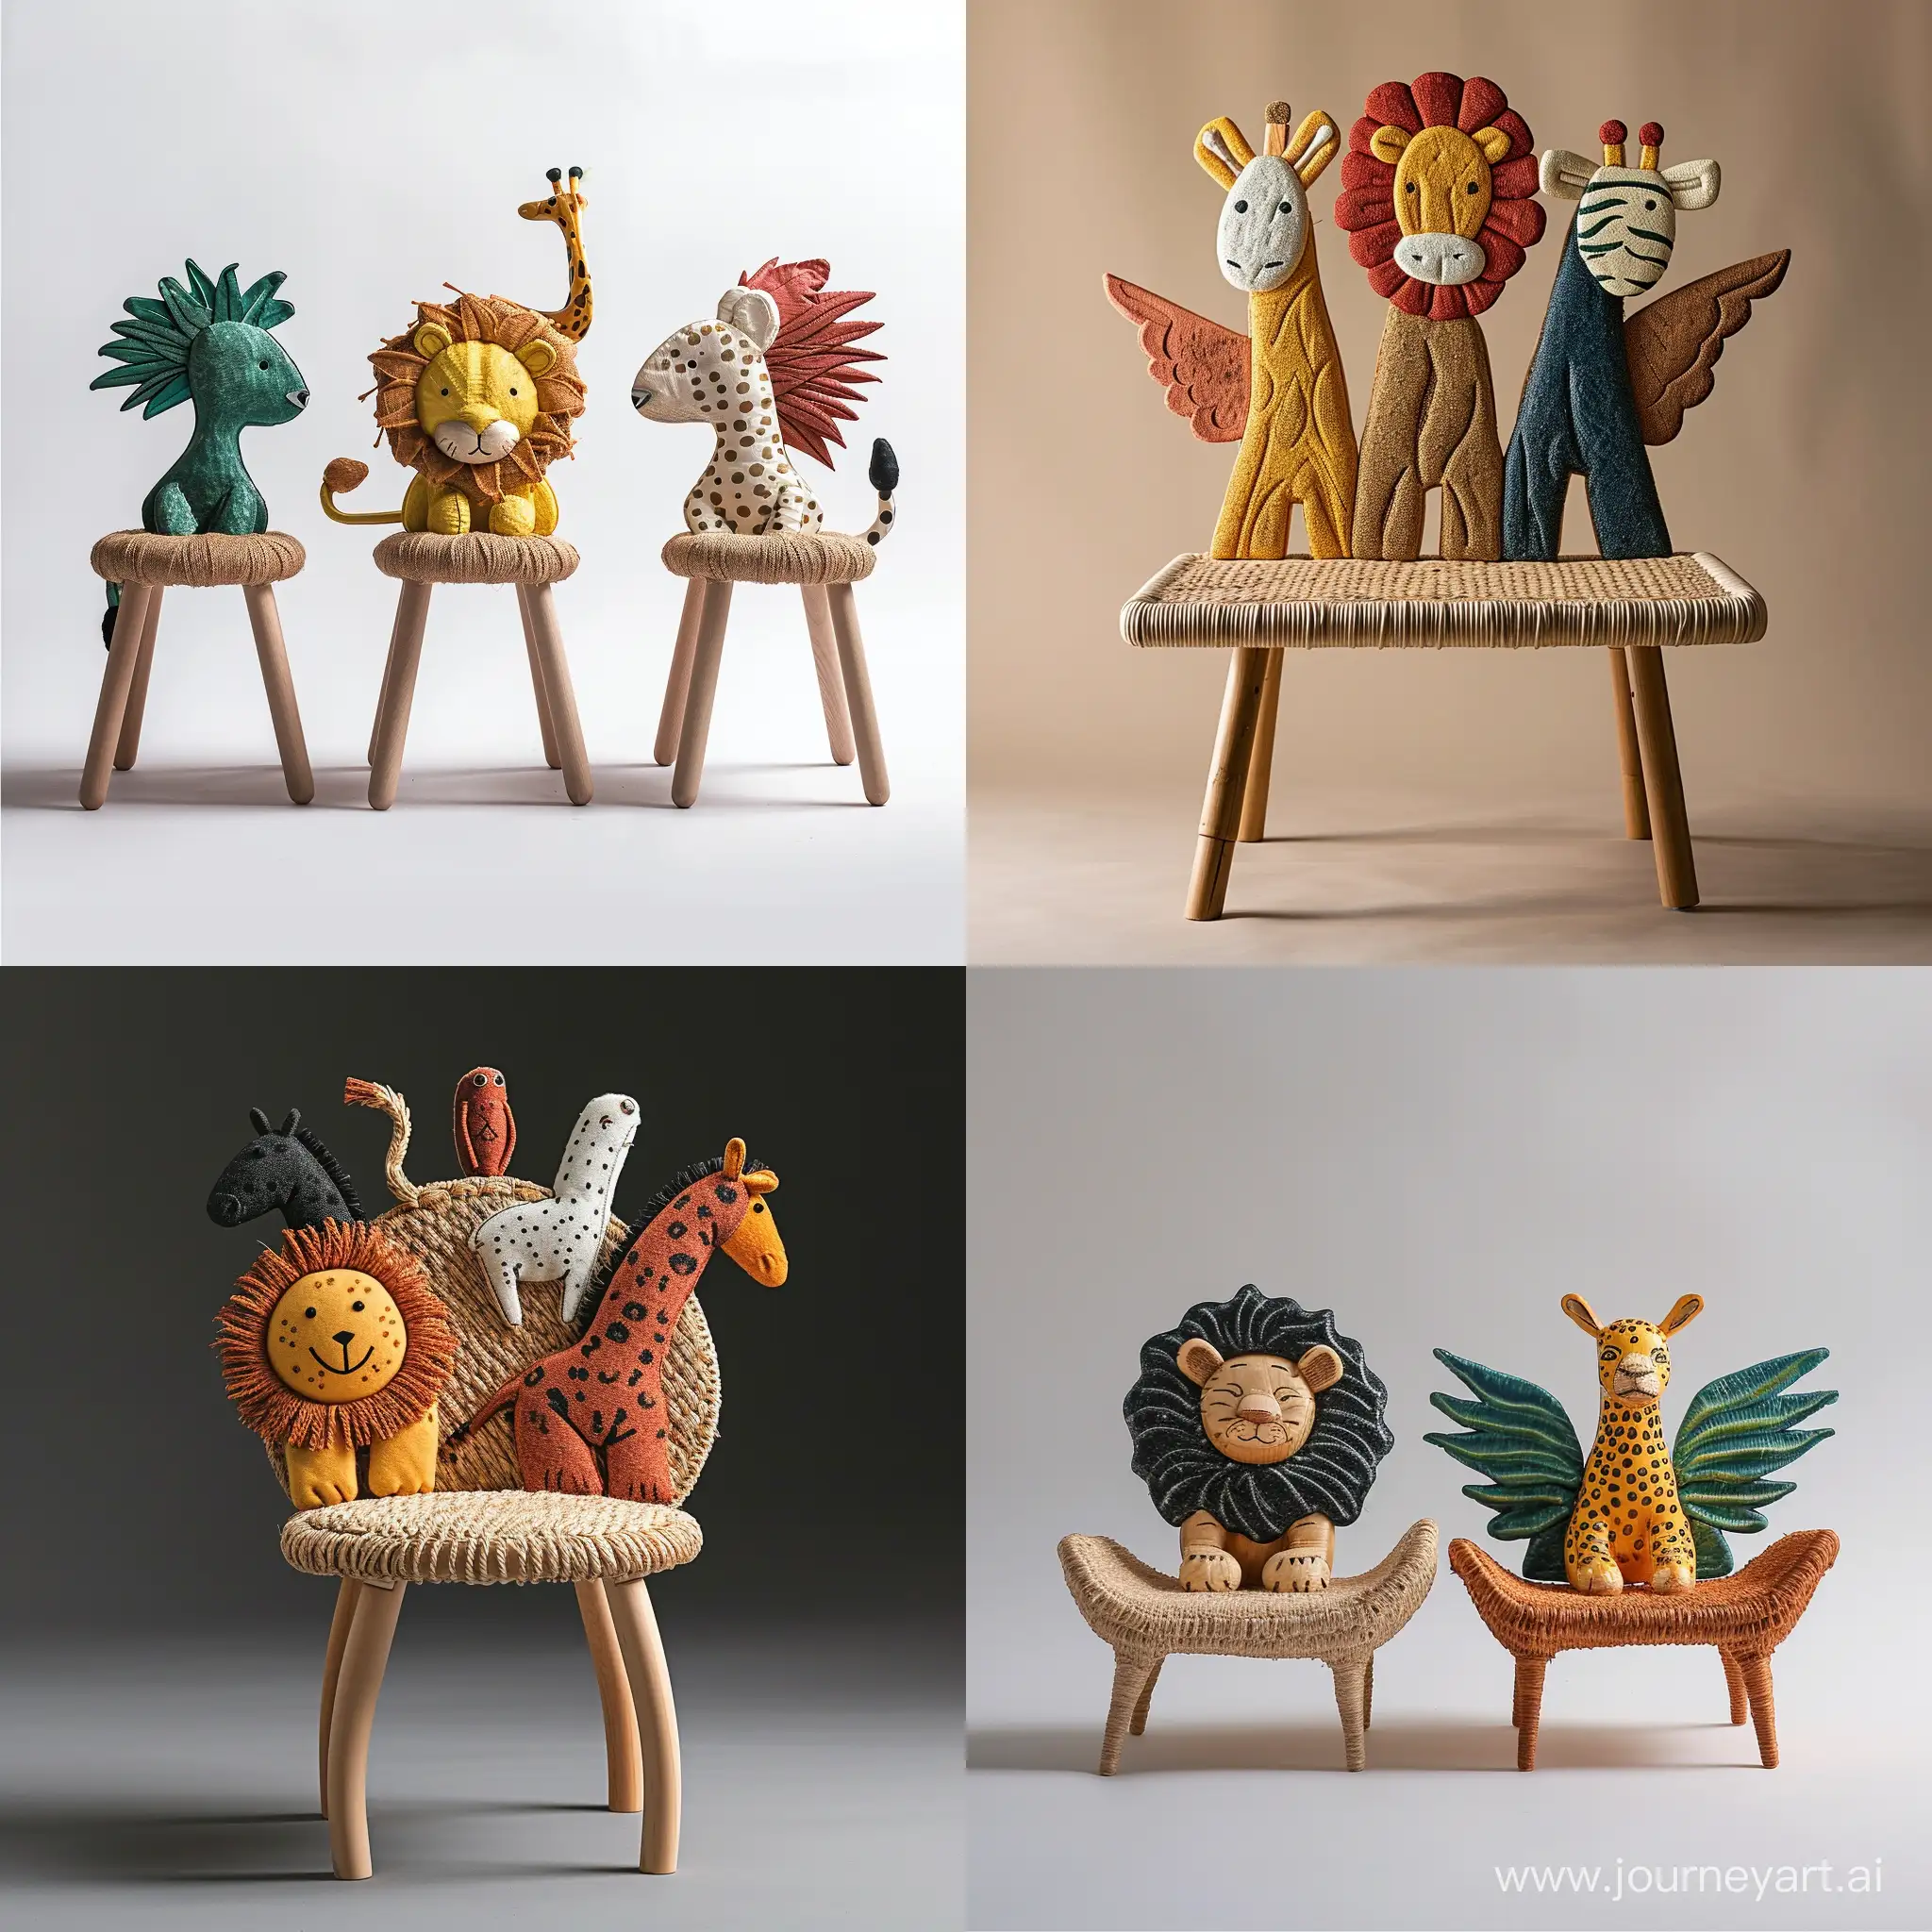 imagine an image of a minimal kids friendly  sturdy children’s chair inspired by Children's drawing of cute safari animals like cute lion or zebra or griffin or cheetah or hippocampus , with backrests shaped like different creatures. Use recycled wood for the frame and woven plant fibers for seating areas, depicted in colors representative of the chosen animals. The seat should stand approximately 30cm tall, built to educate about wildlife and ensure durability.unreal ,realistic style